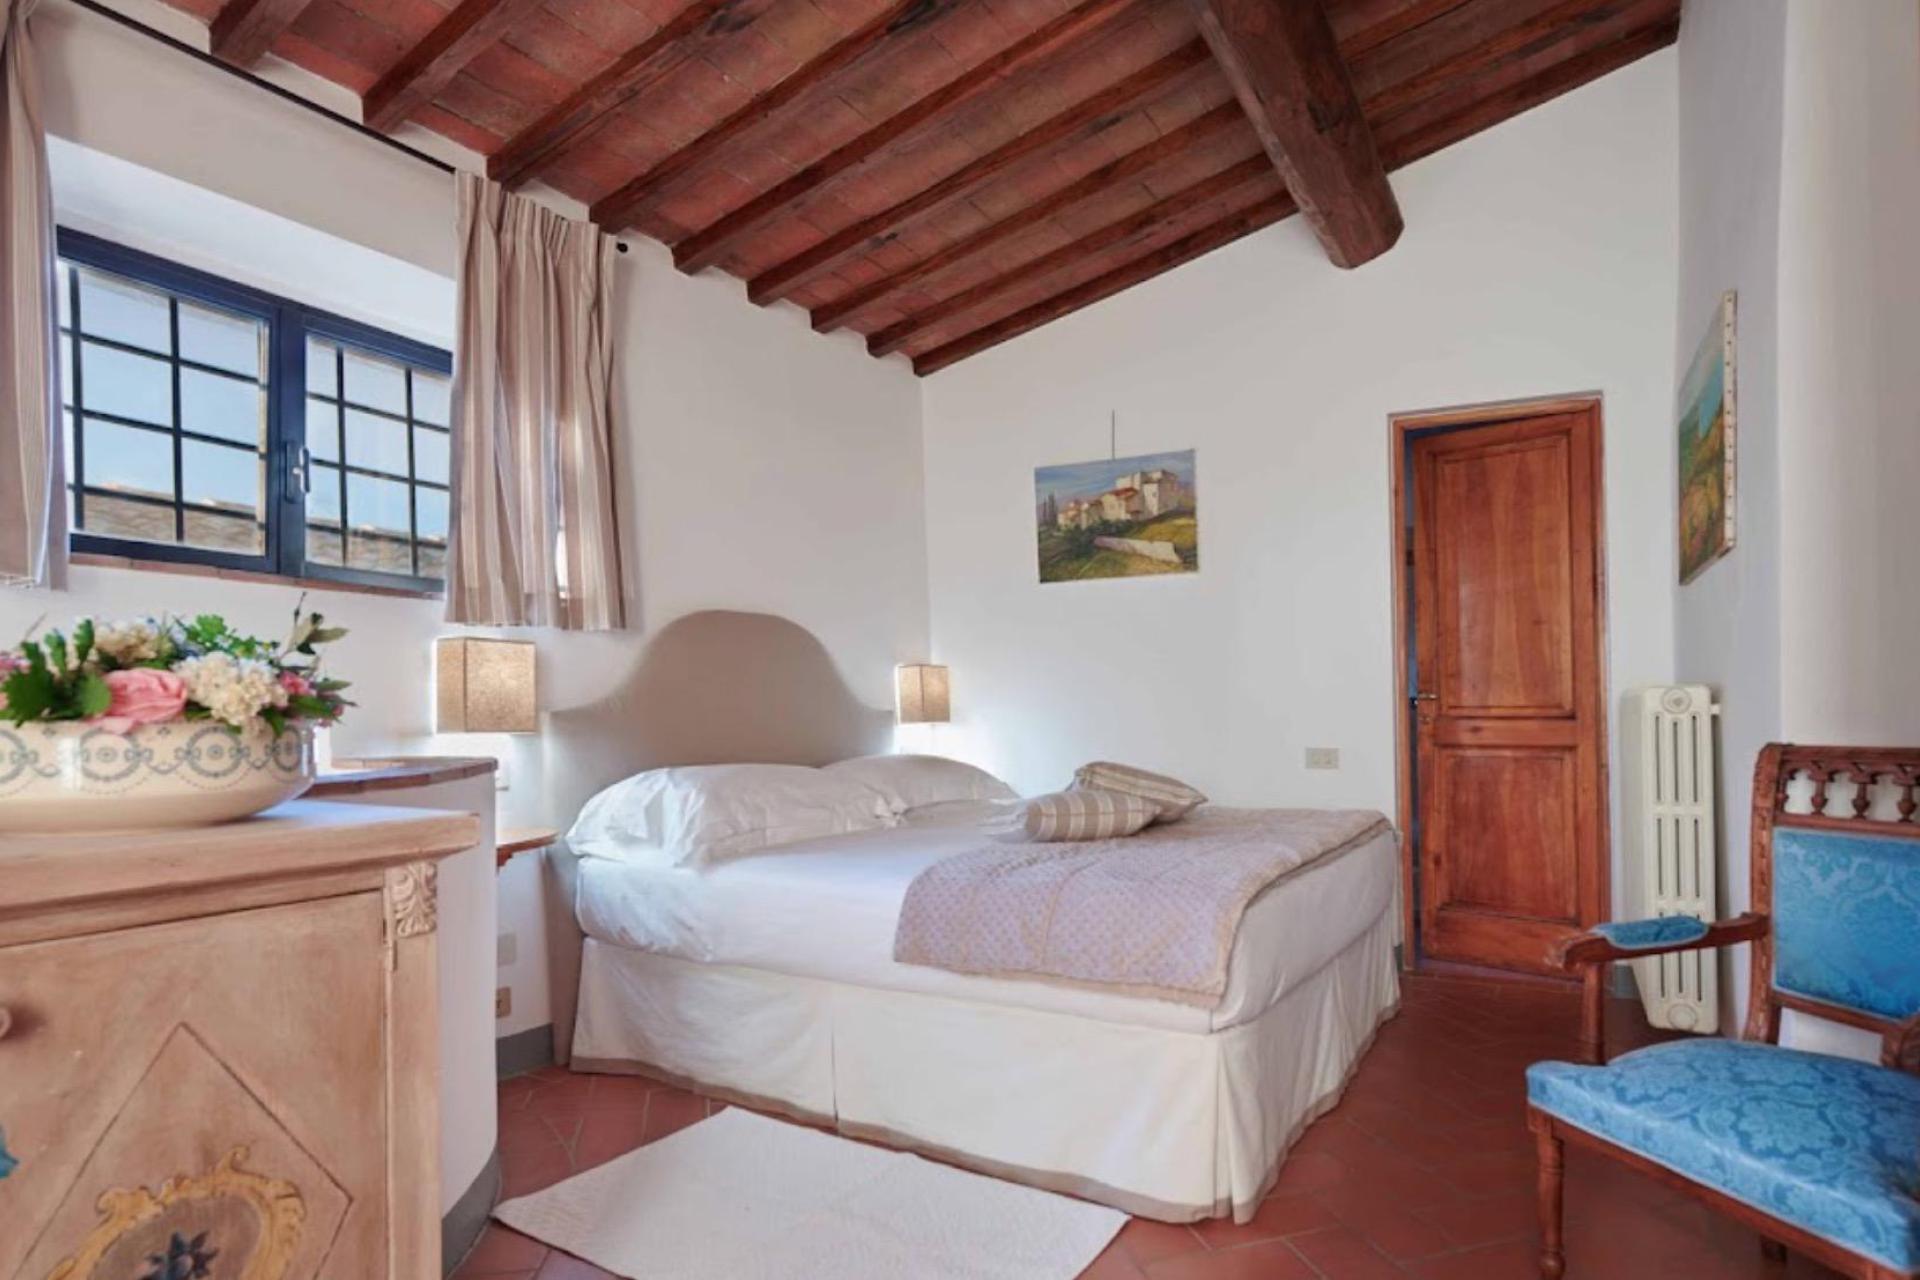 Agriturismo Tuscany Stylish and authentic agriturismo in the Chianti region